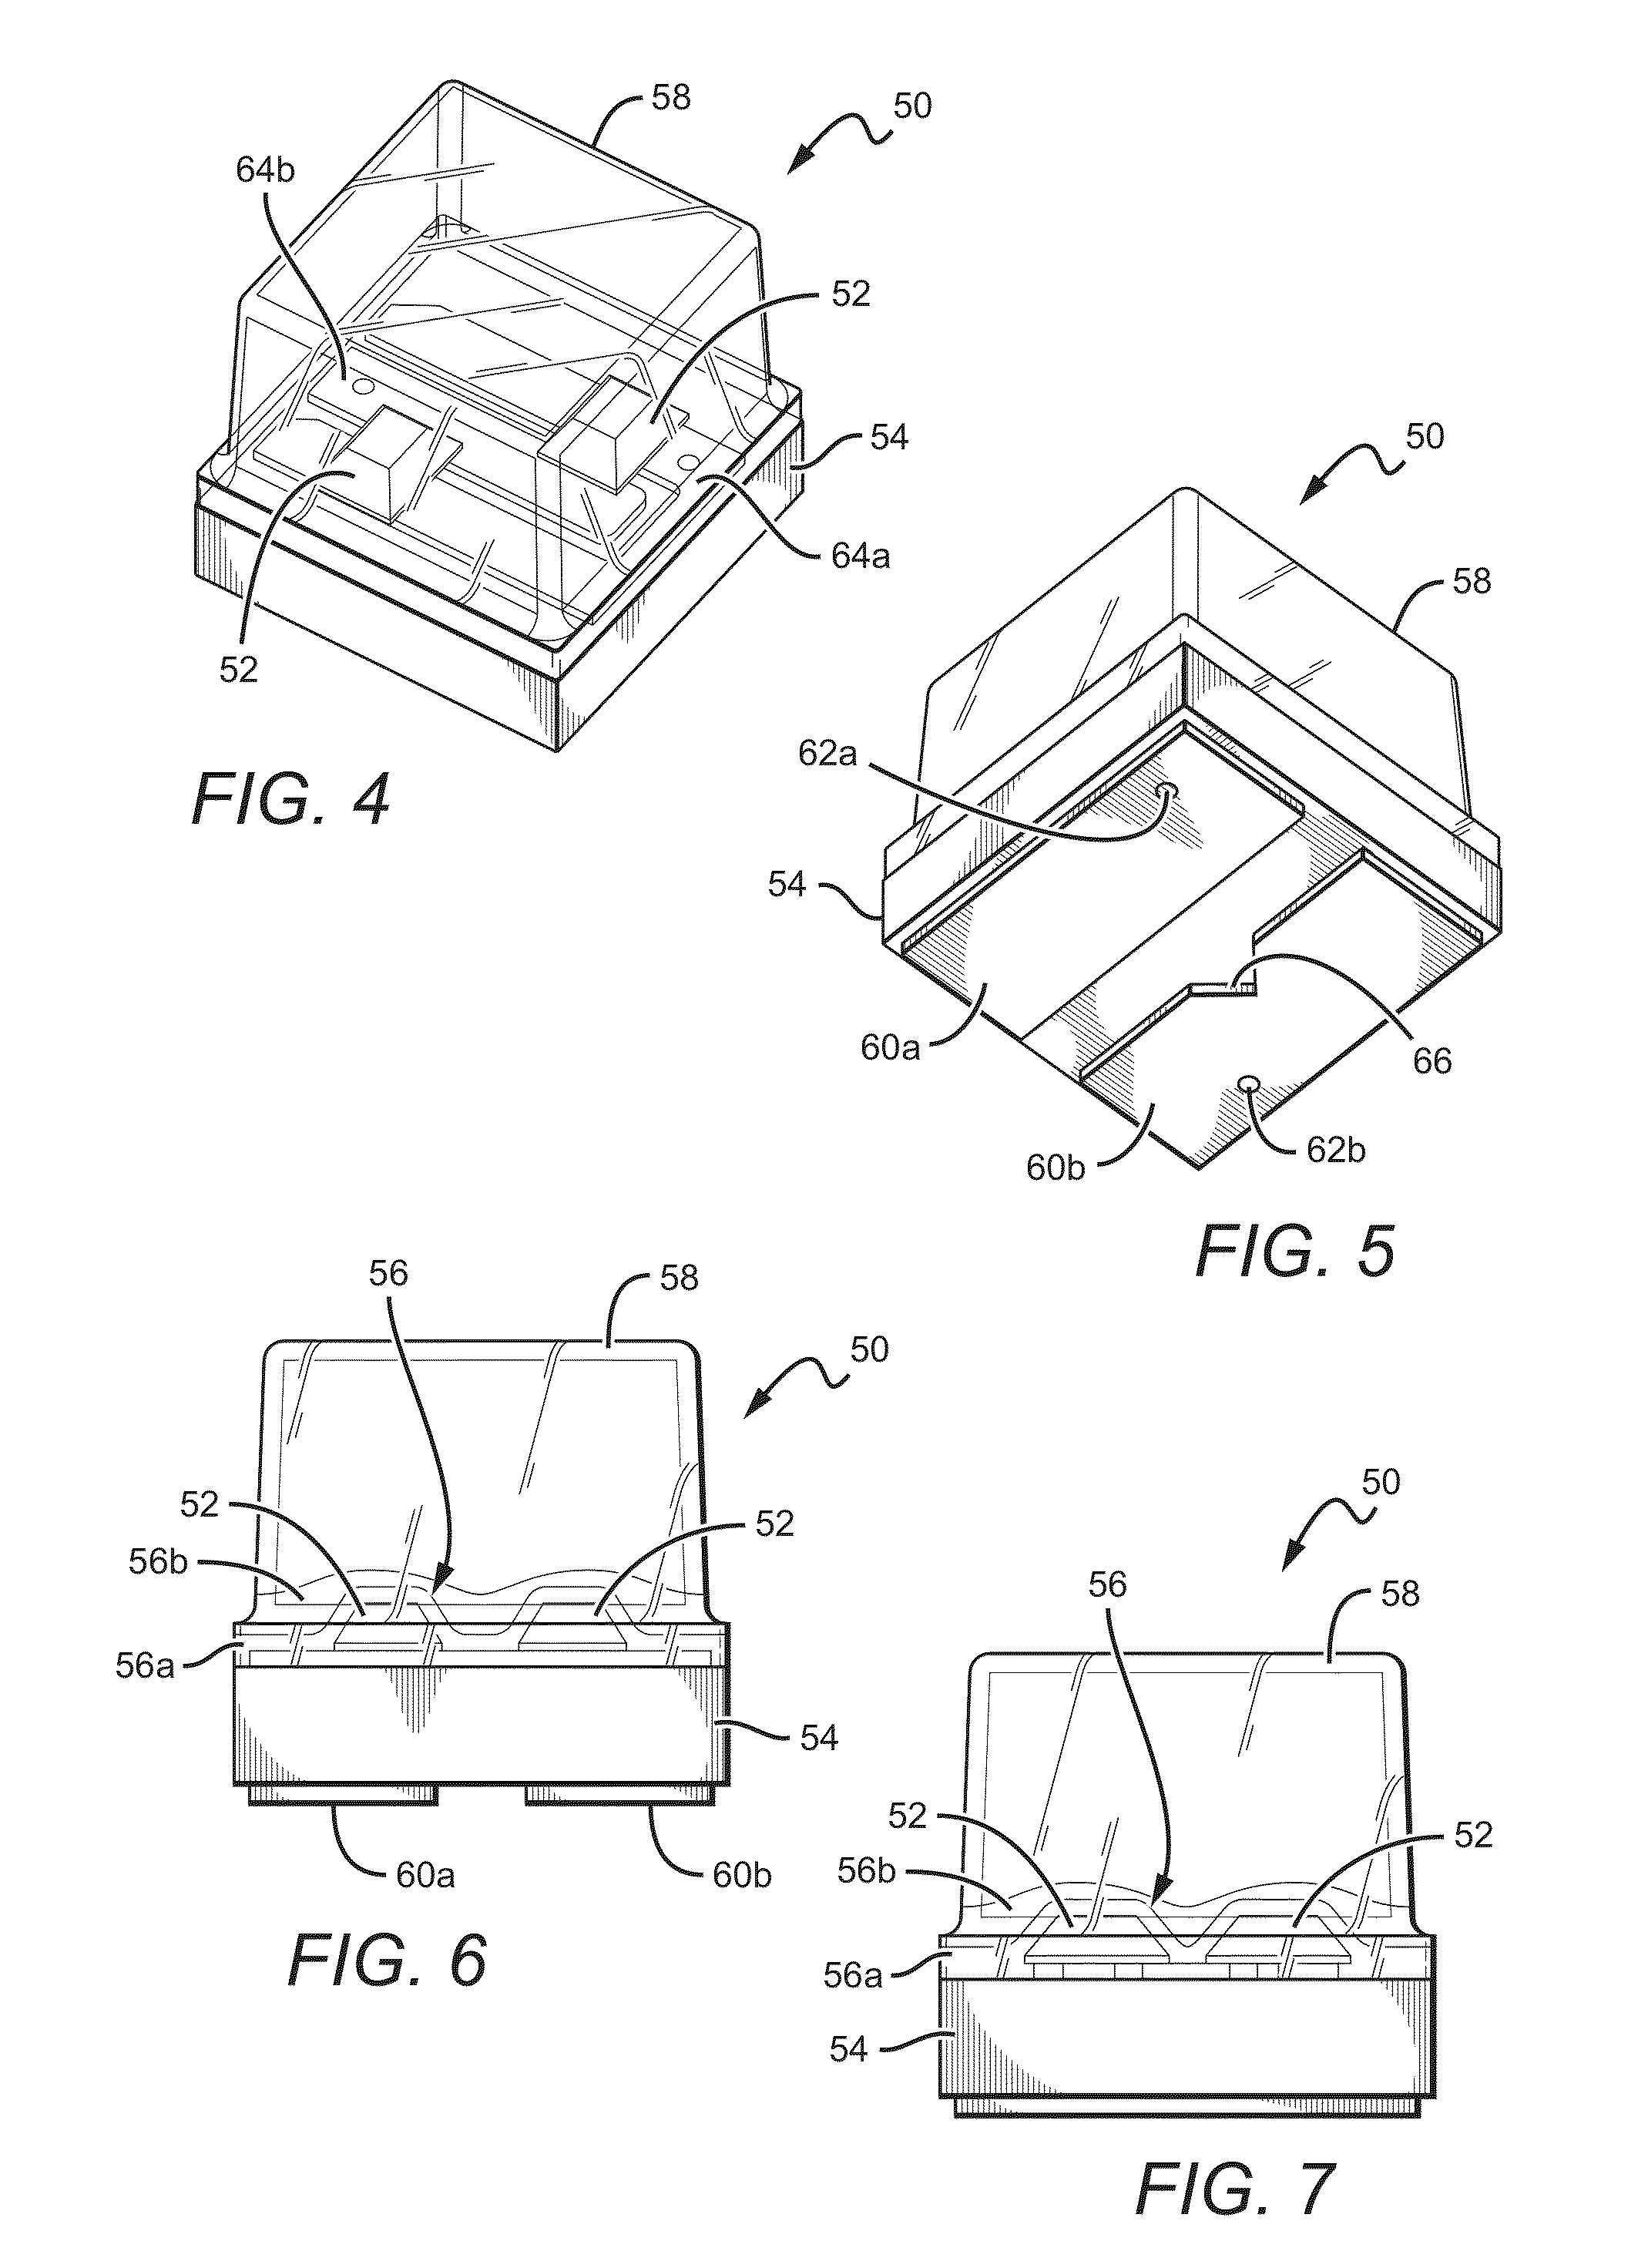 Multi-layer conversion material for down conversion in solid state lighting